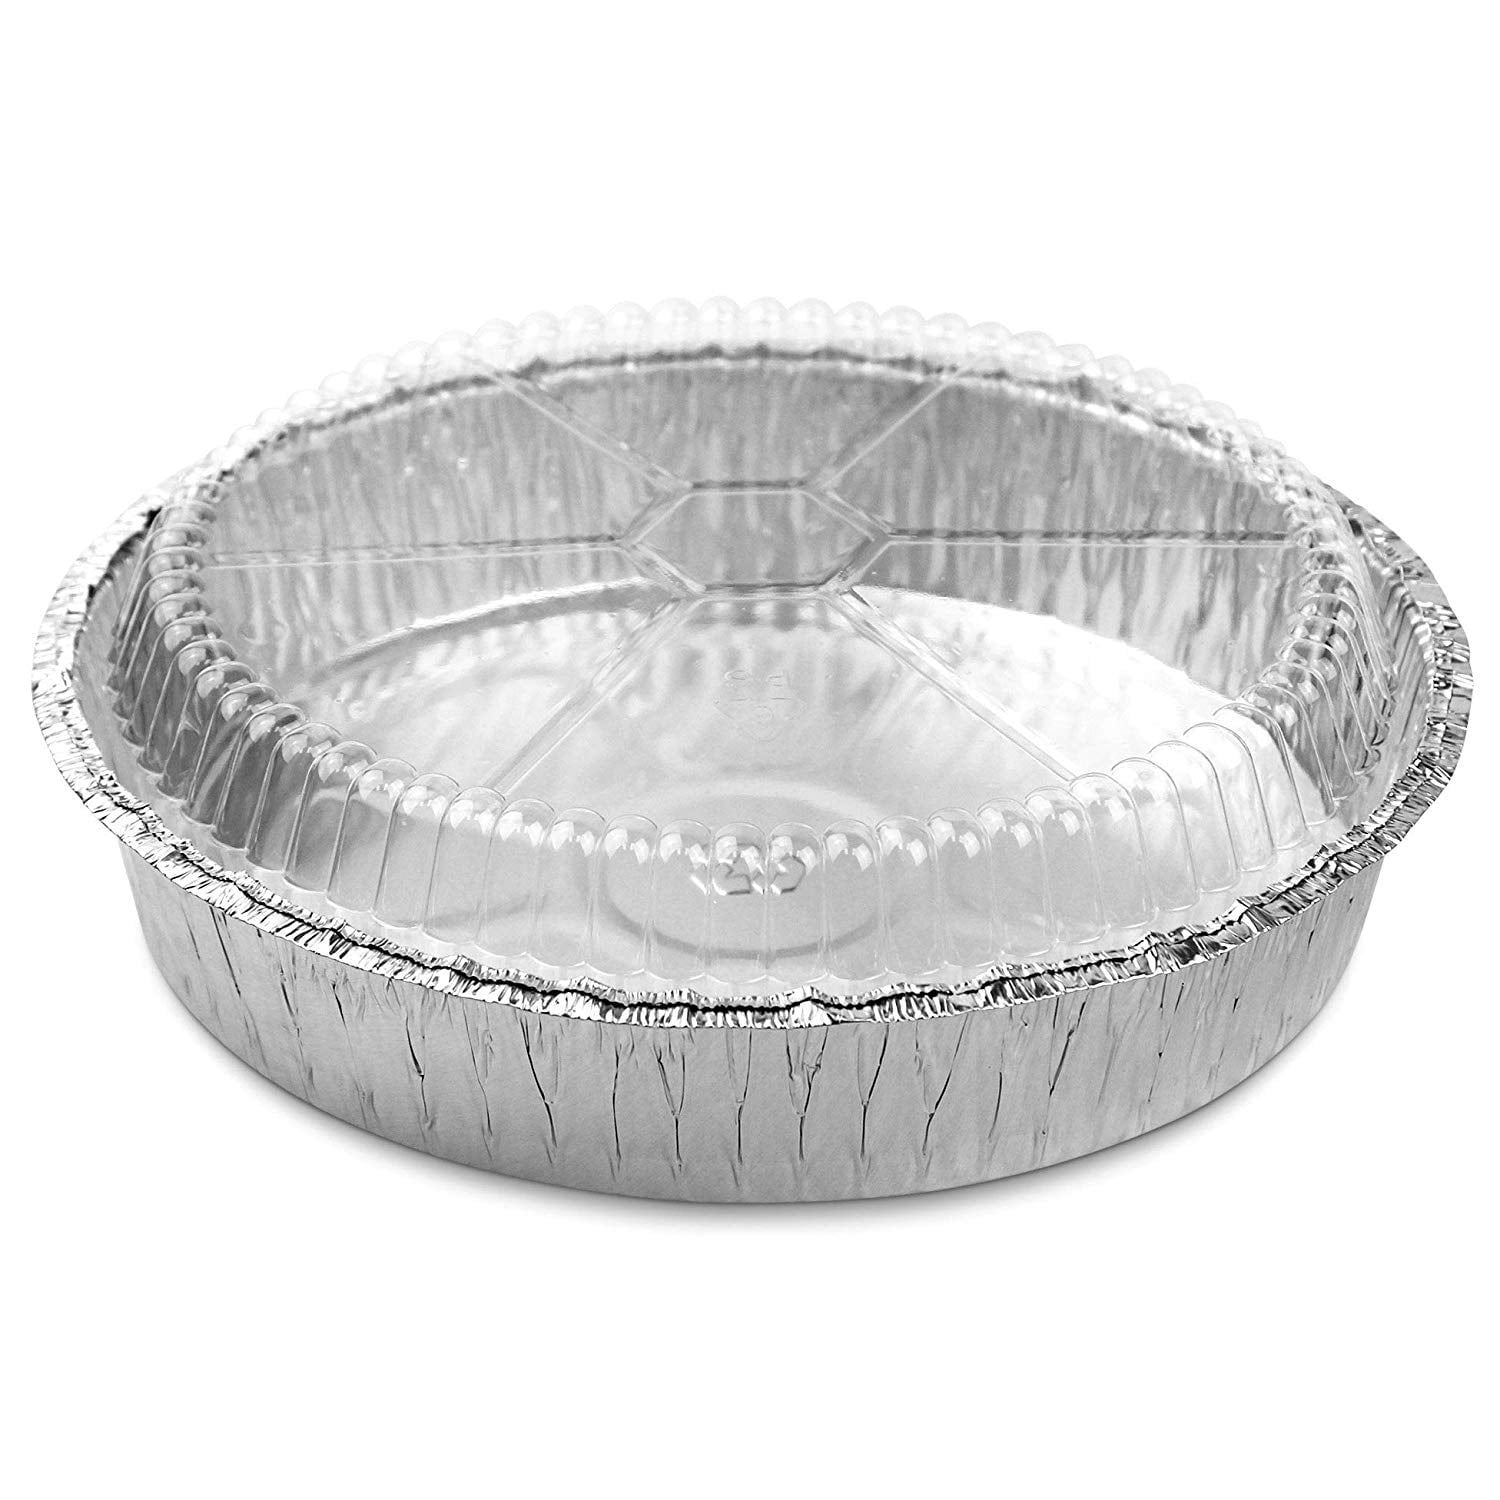 Environmentally Friendly Roasting Baking Heavy Duty Tin Foil Pans for Reheating Meal Prep to-Go Containers Pack of 14 DecorRack Round 7 Inch Aluminum Pans with Dome Lid 